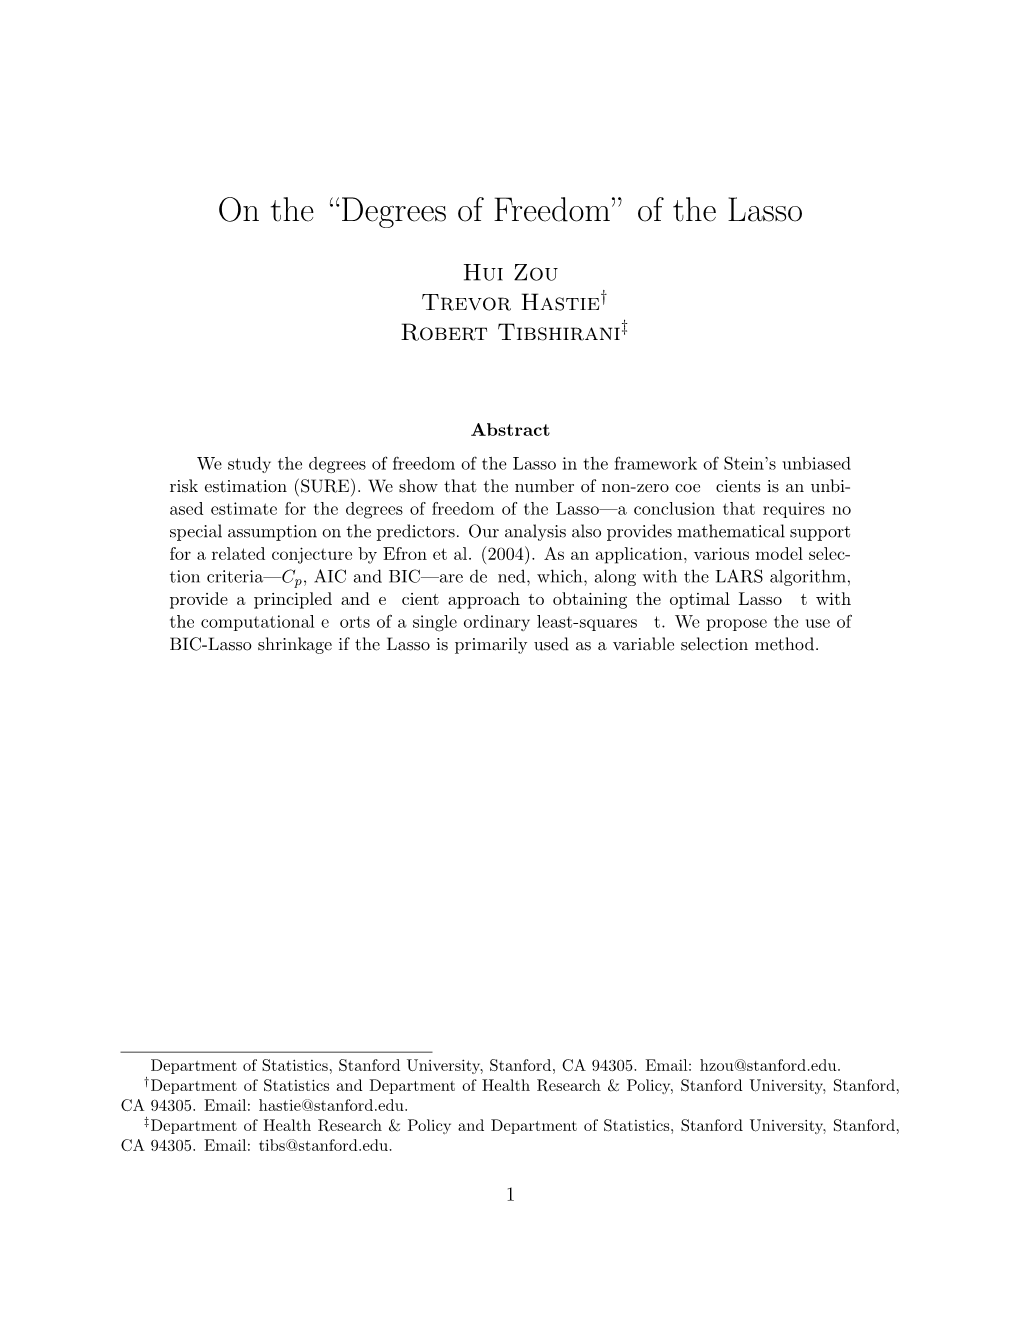 On the “Degrees of Freedom” of the Lasso